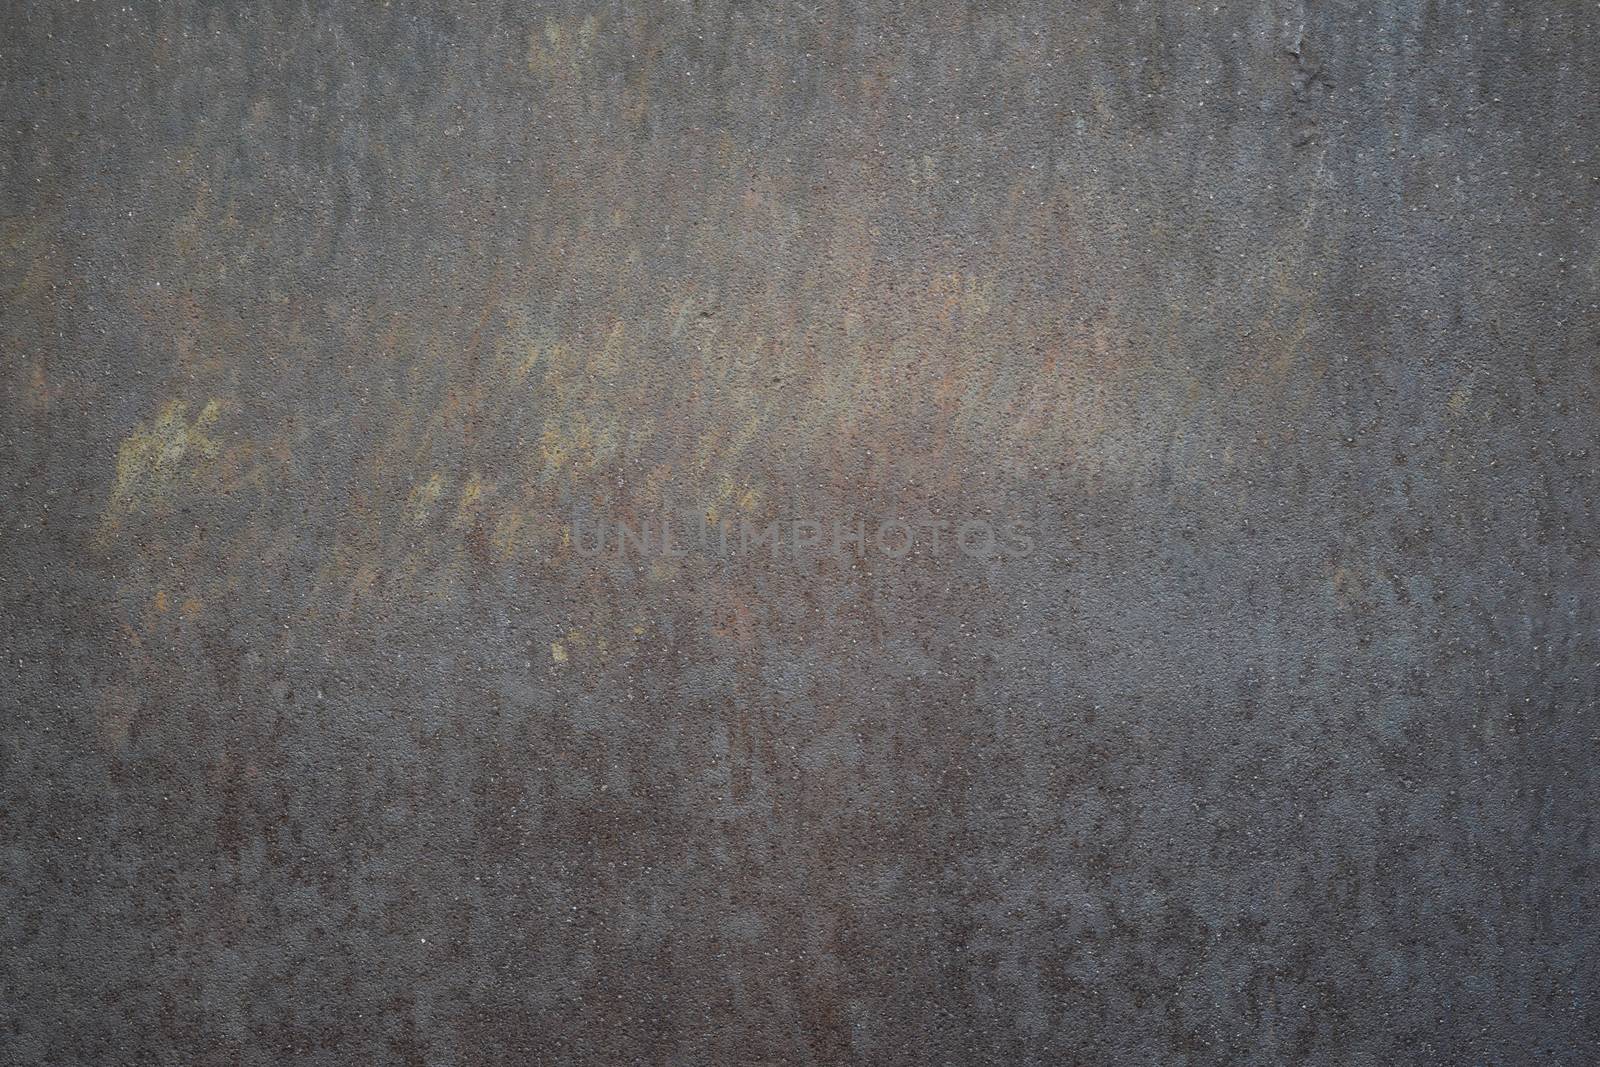 Grunge Rusted Metal Texture. Rusty Corrosion And Oxidized Background.